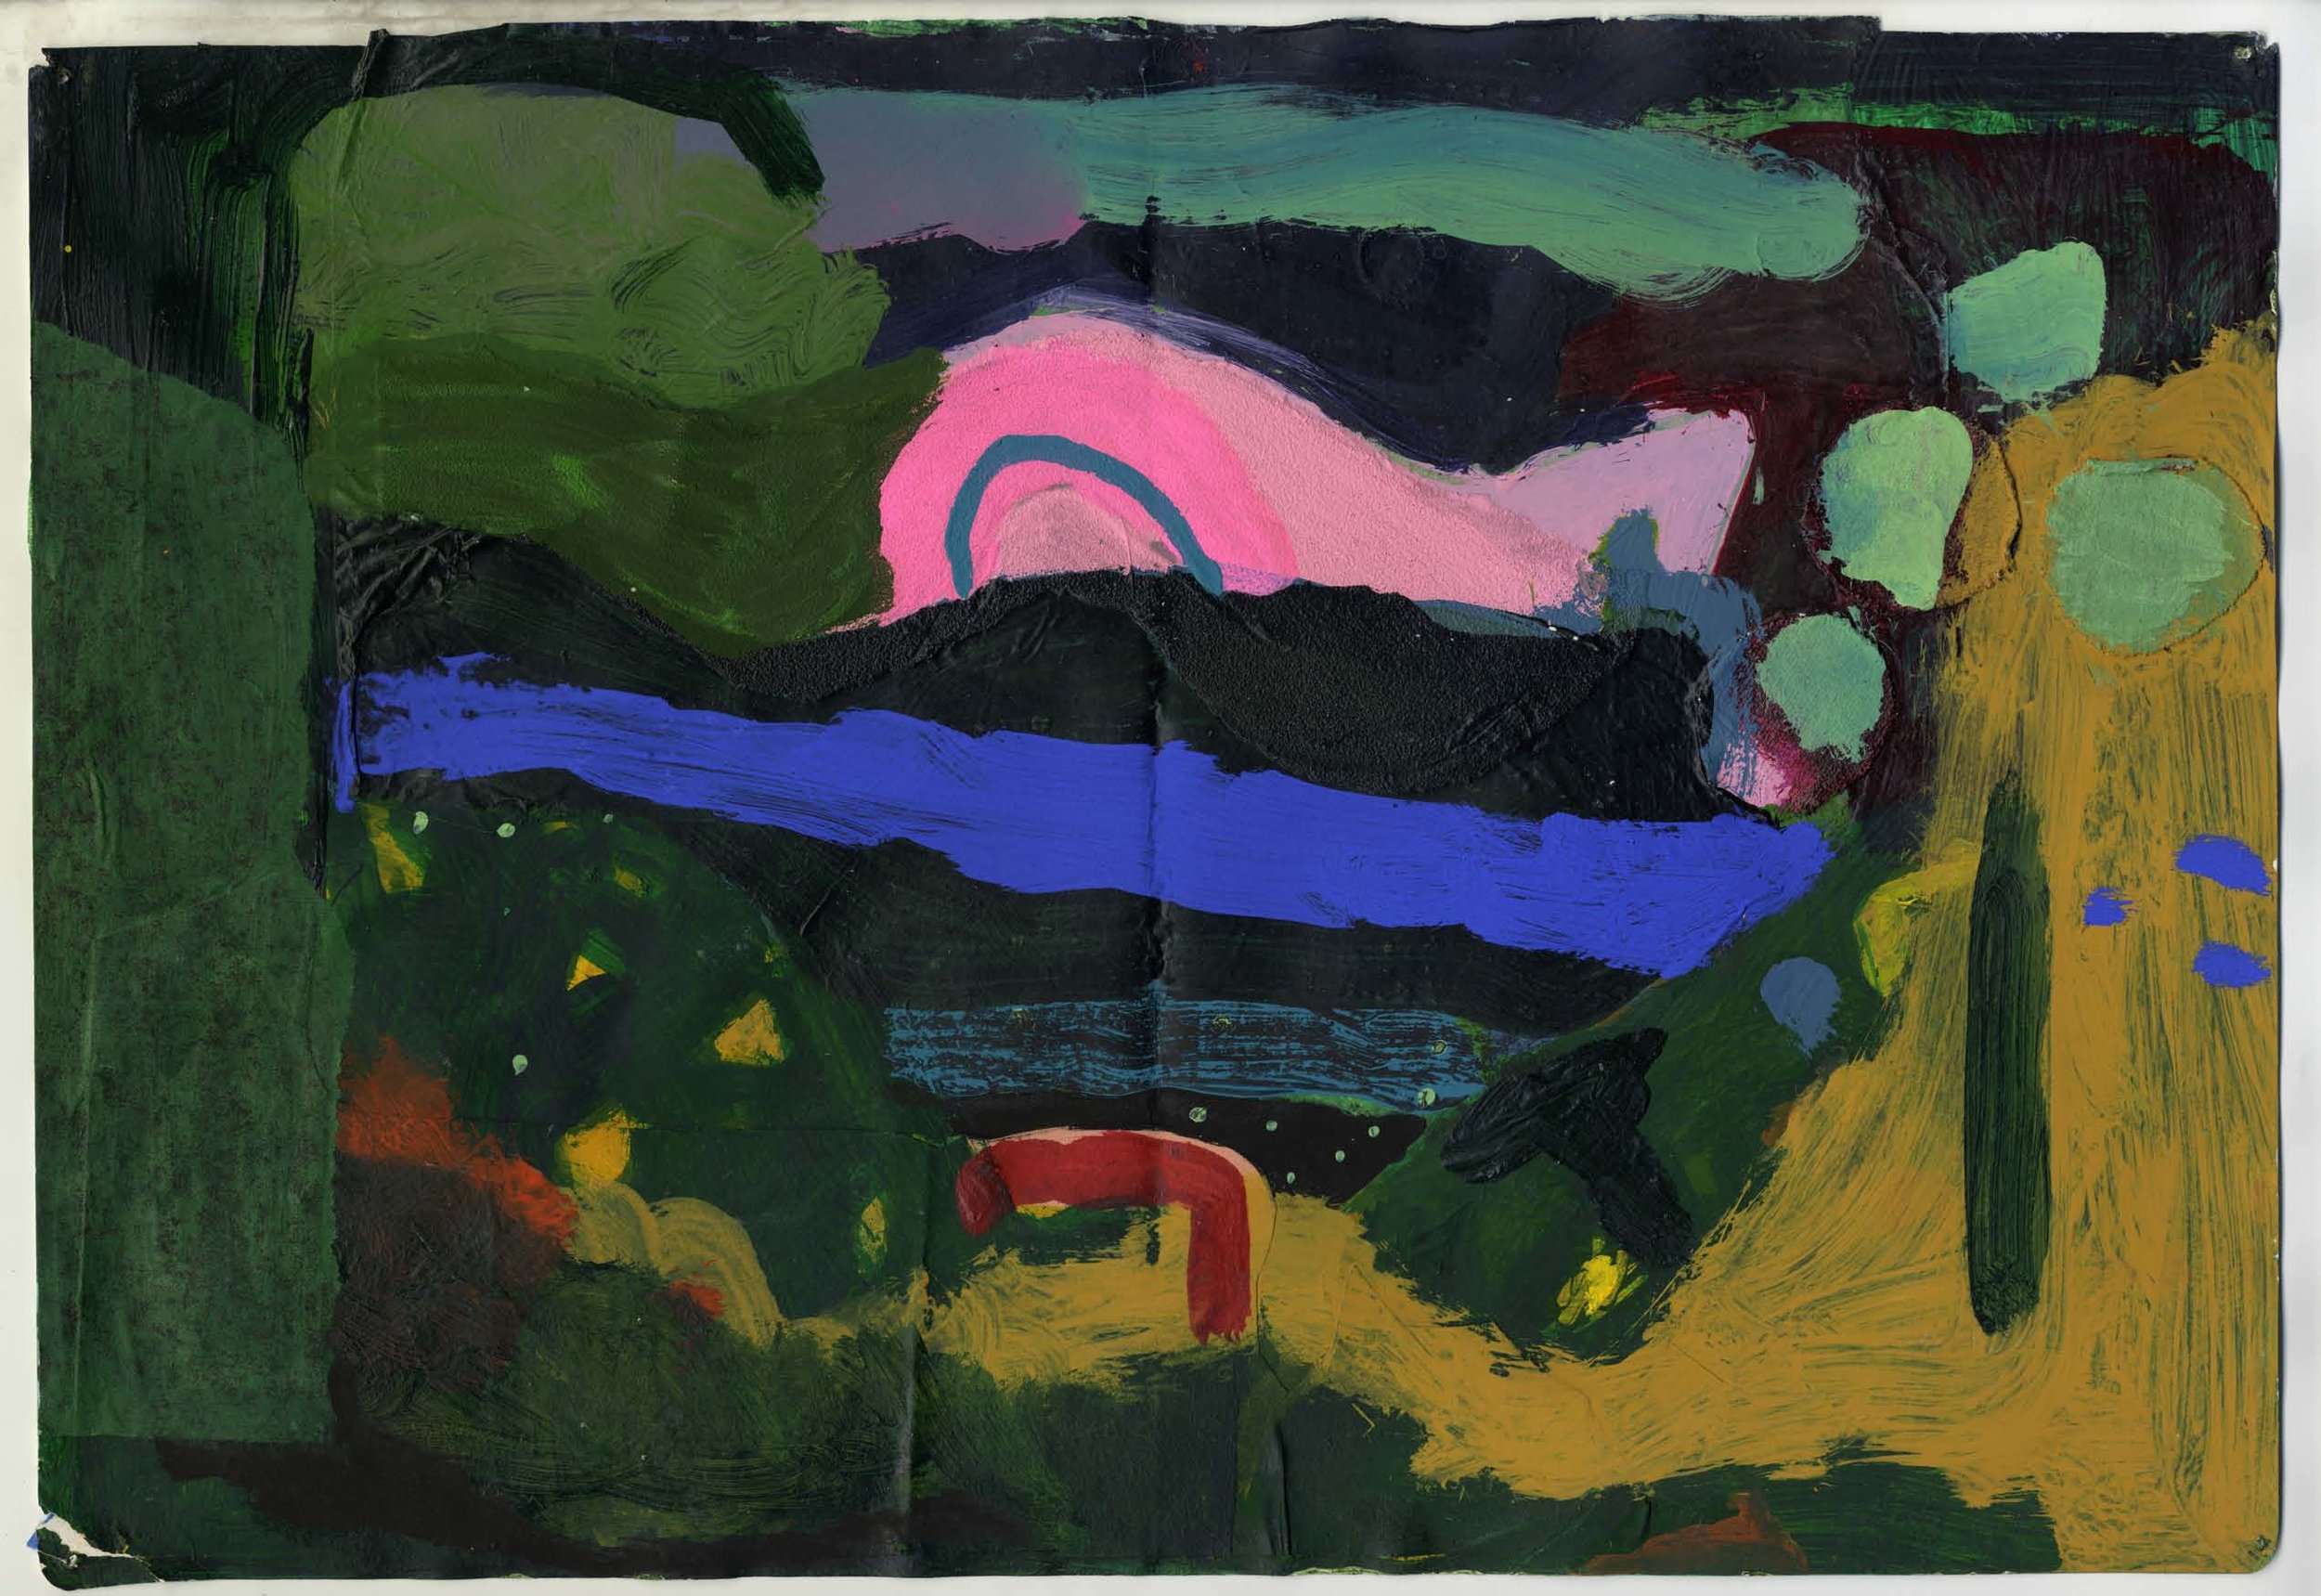  “Night River”  Gouache, acrylic and paper on paper  11.5 X 16.5 “  2014 